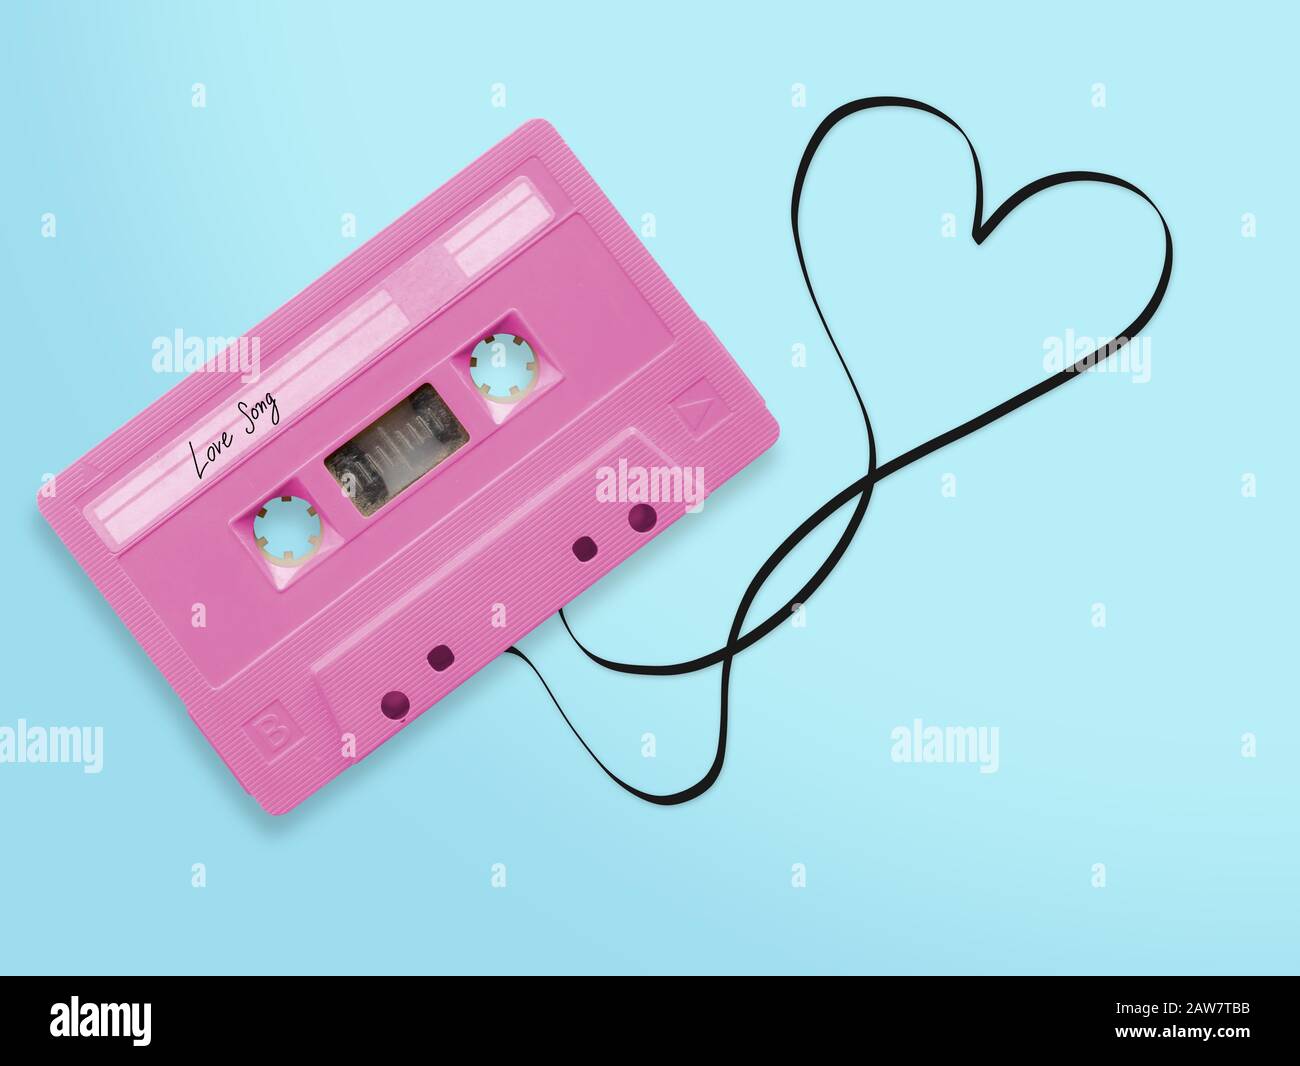 pink audio cassette tape with label tag love song tangled tape ribbon heart shape isolated on blue background, top view. Stock Photo